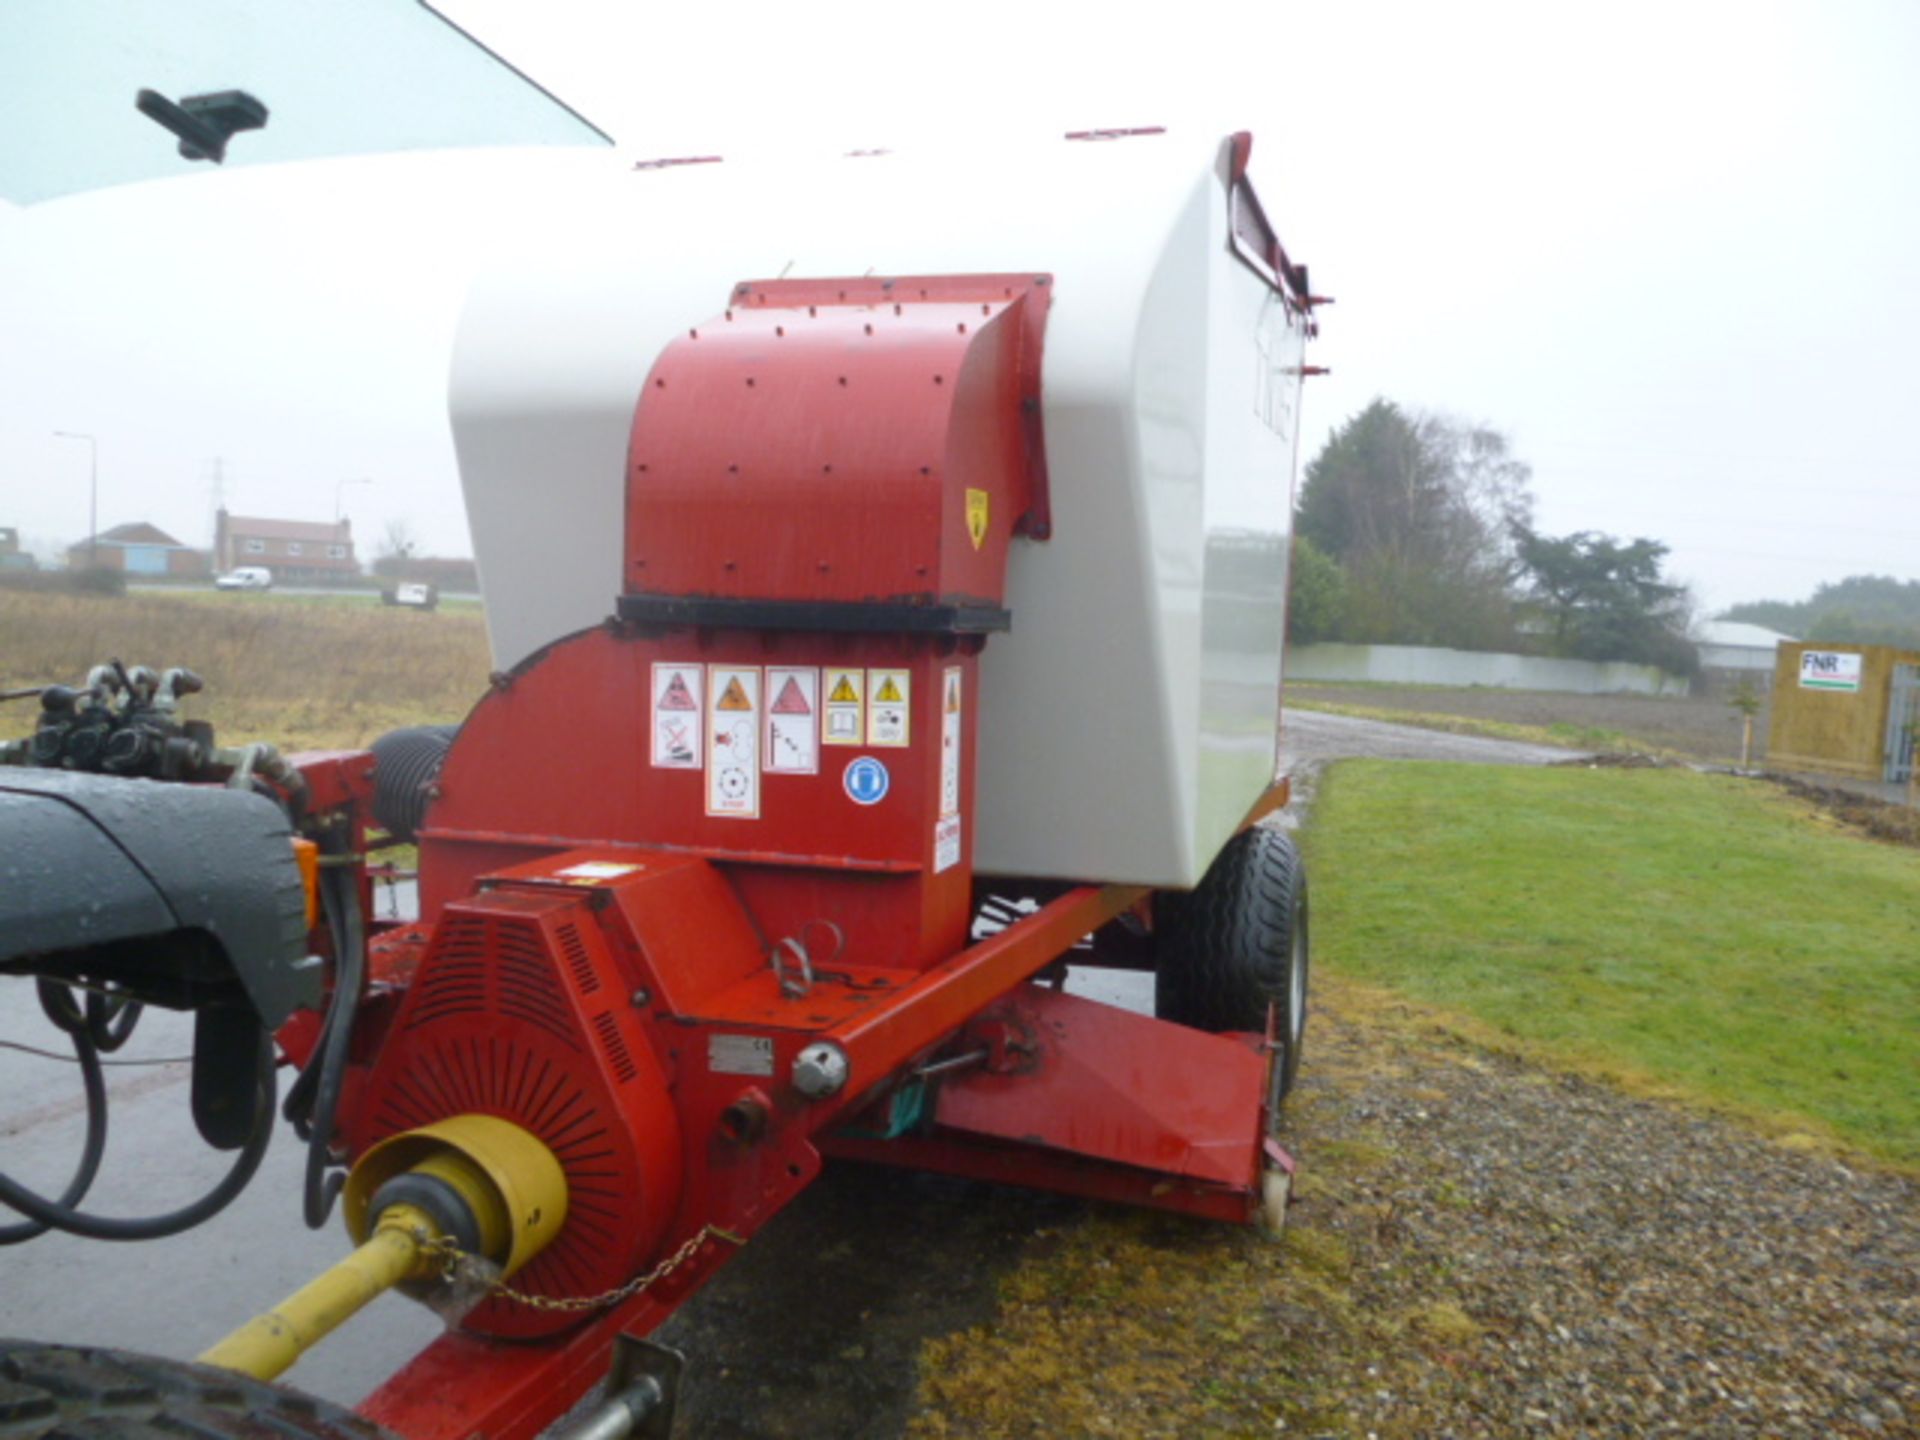 TURFMATCH TM5 VACUUM SWEEPER - YEAR 2008 TRACTOR TRAILED SWEEPER VACUUM. - Image 3 of 4